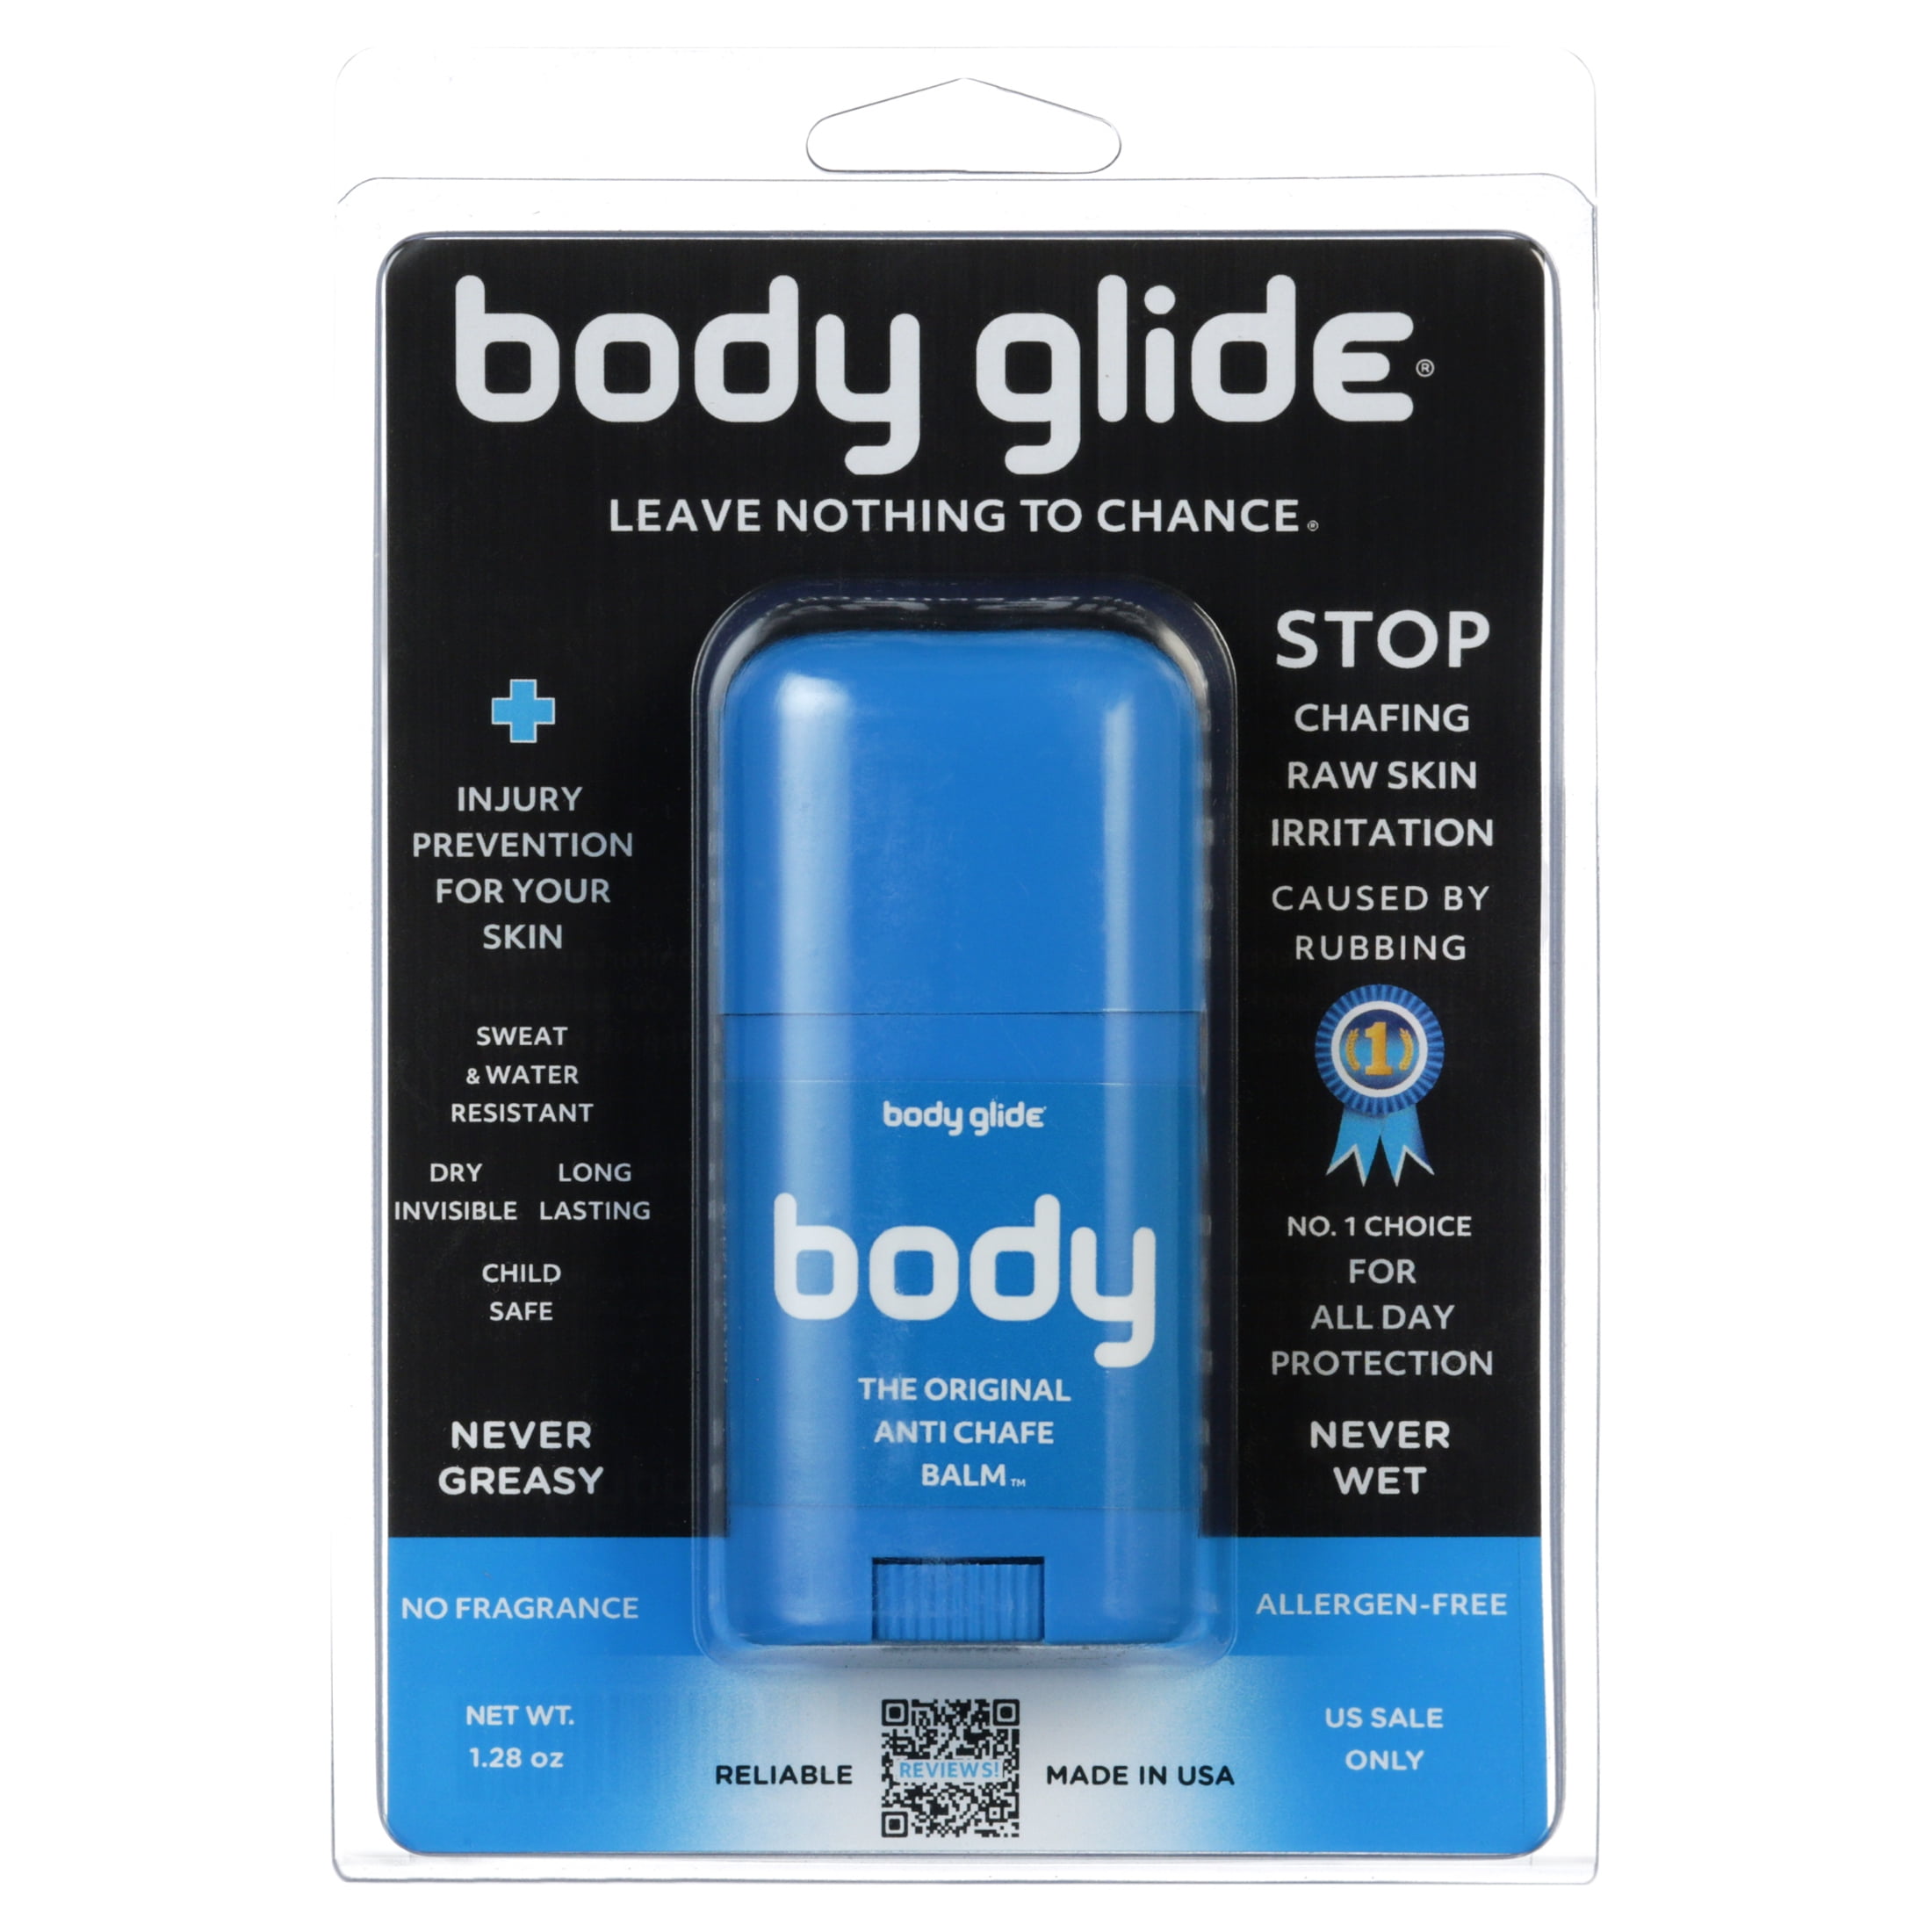 Bodyglide Foot Glide Anti-Chafing Skin Protectant - 0.35 oz.